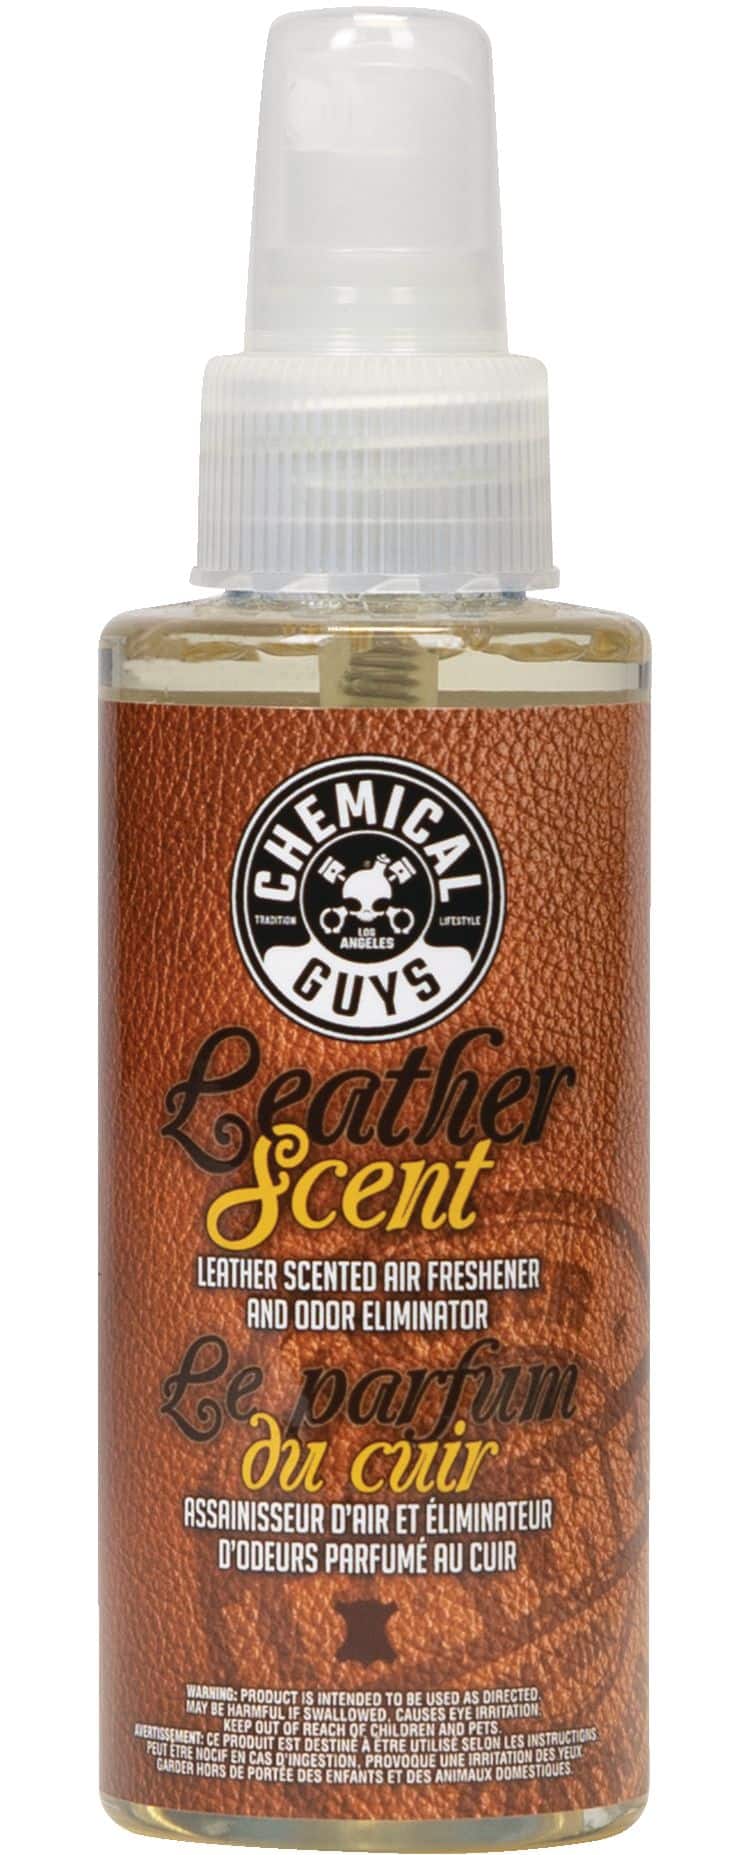 2 Ct) Chemical Guys Leather Scented Air Freshener & Odor